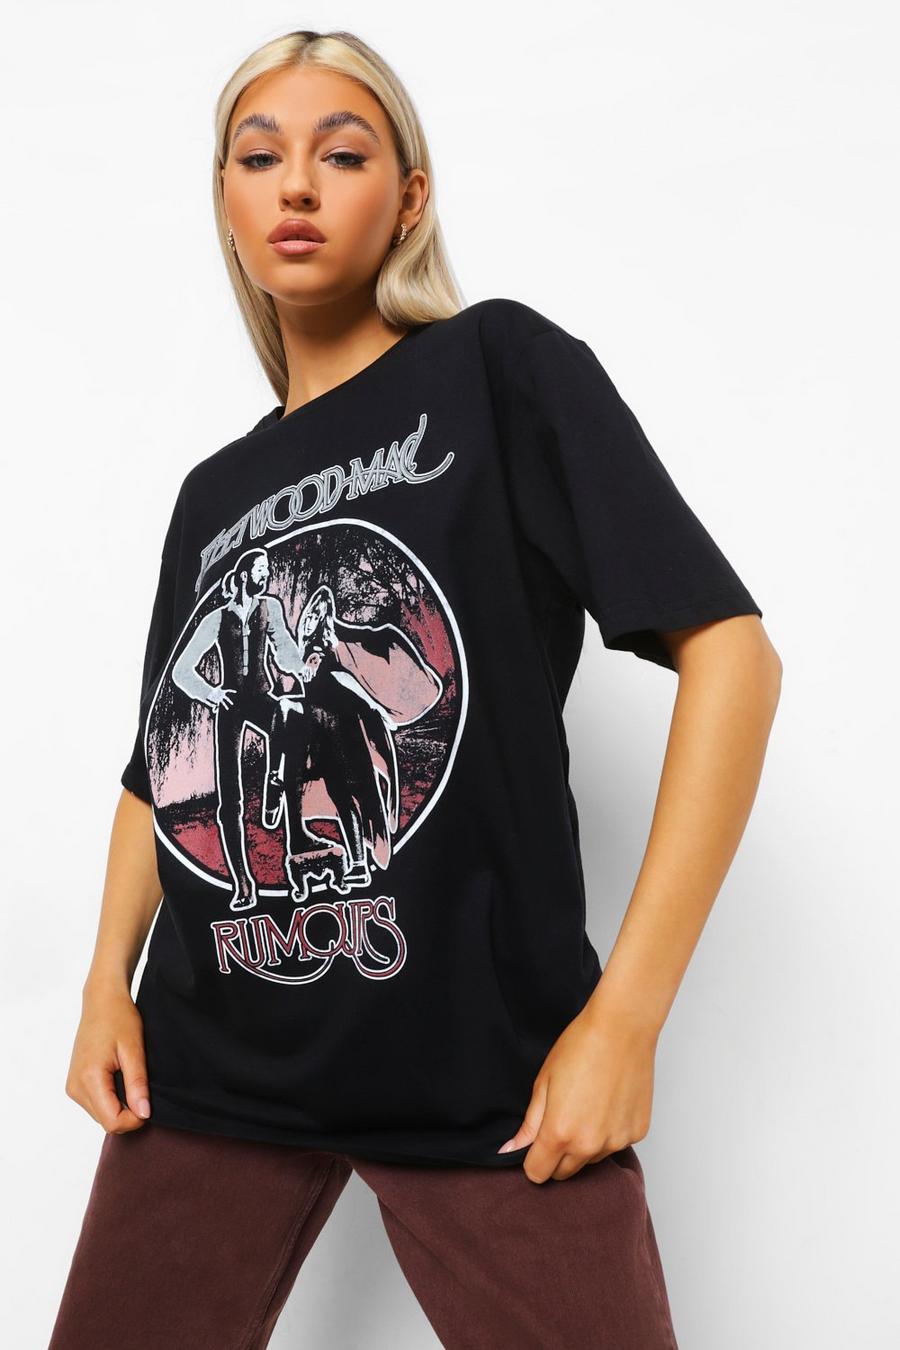 Black Tall - Fleetwood Mac T-shirt med tryck image number 1